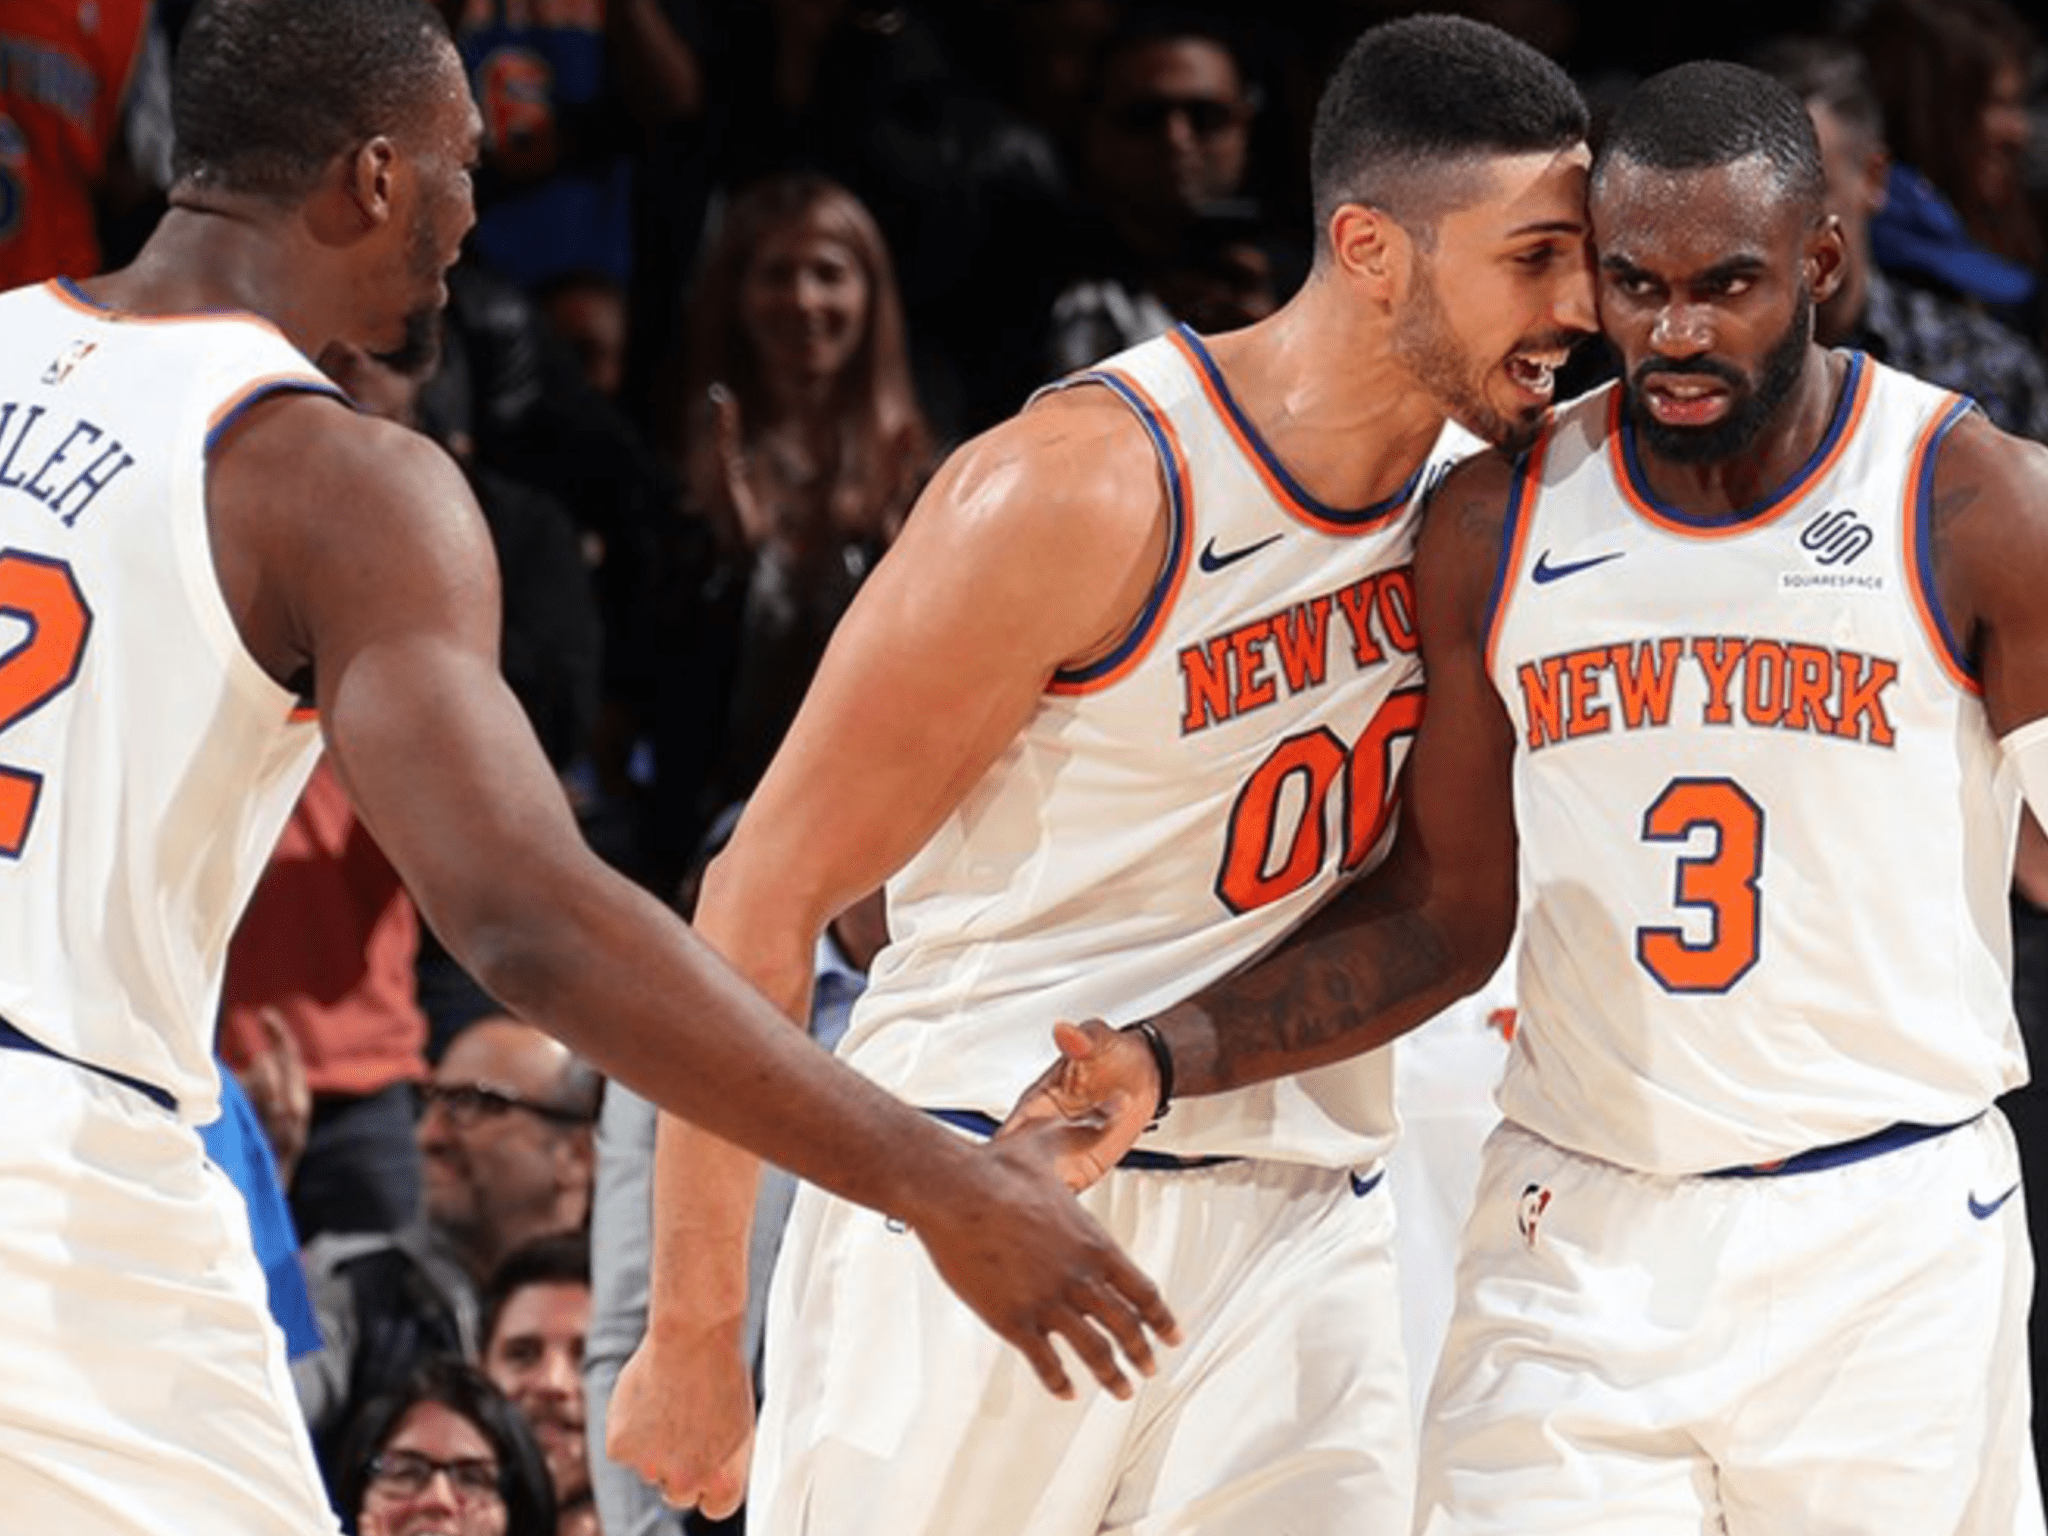 The Two Weekend Losses Still Brings Hope for the Knicks